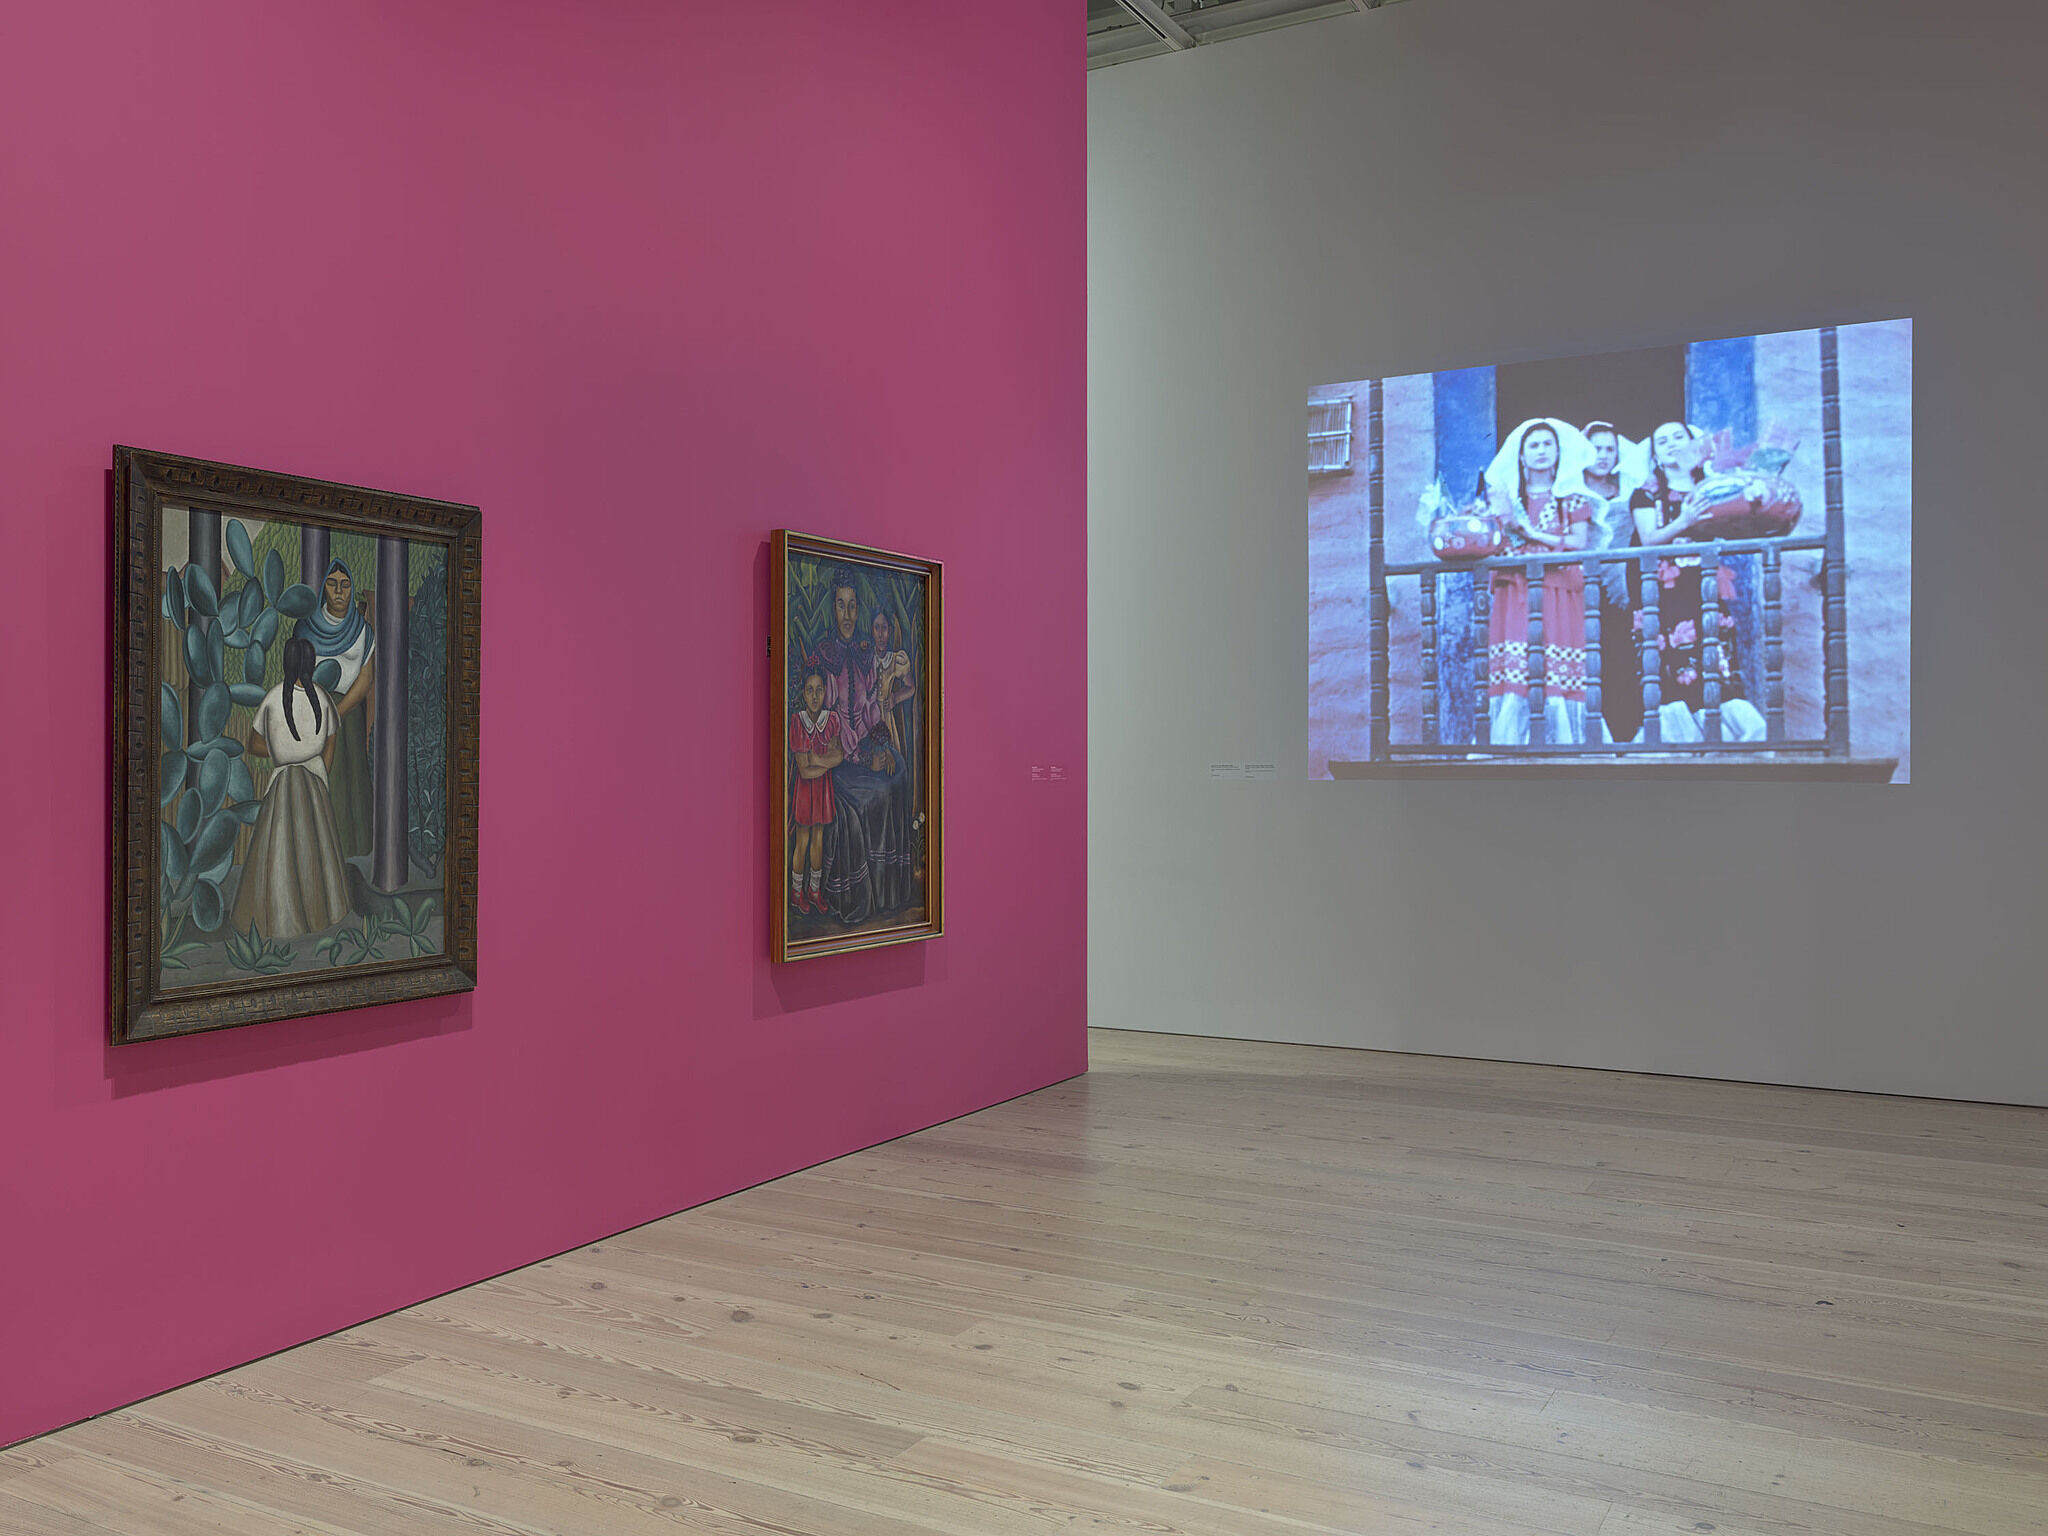 A photo of the Whitney galleries with paintings on the walls.